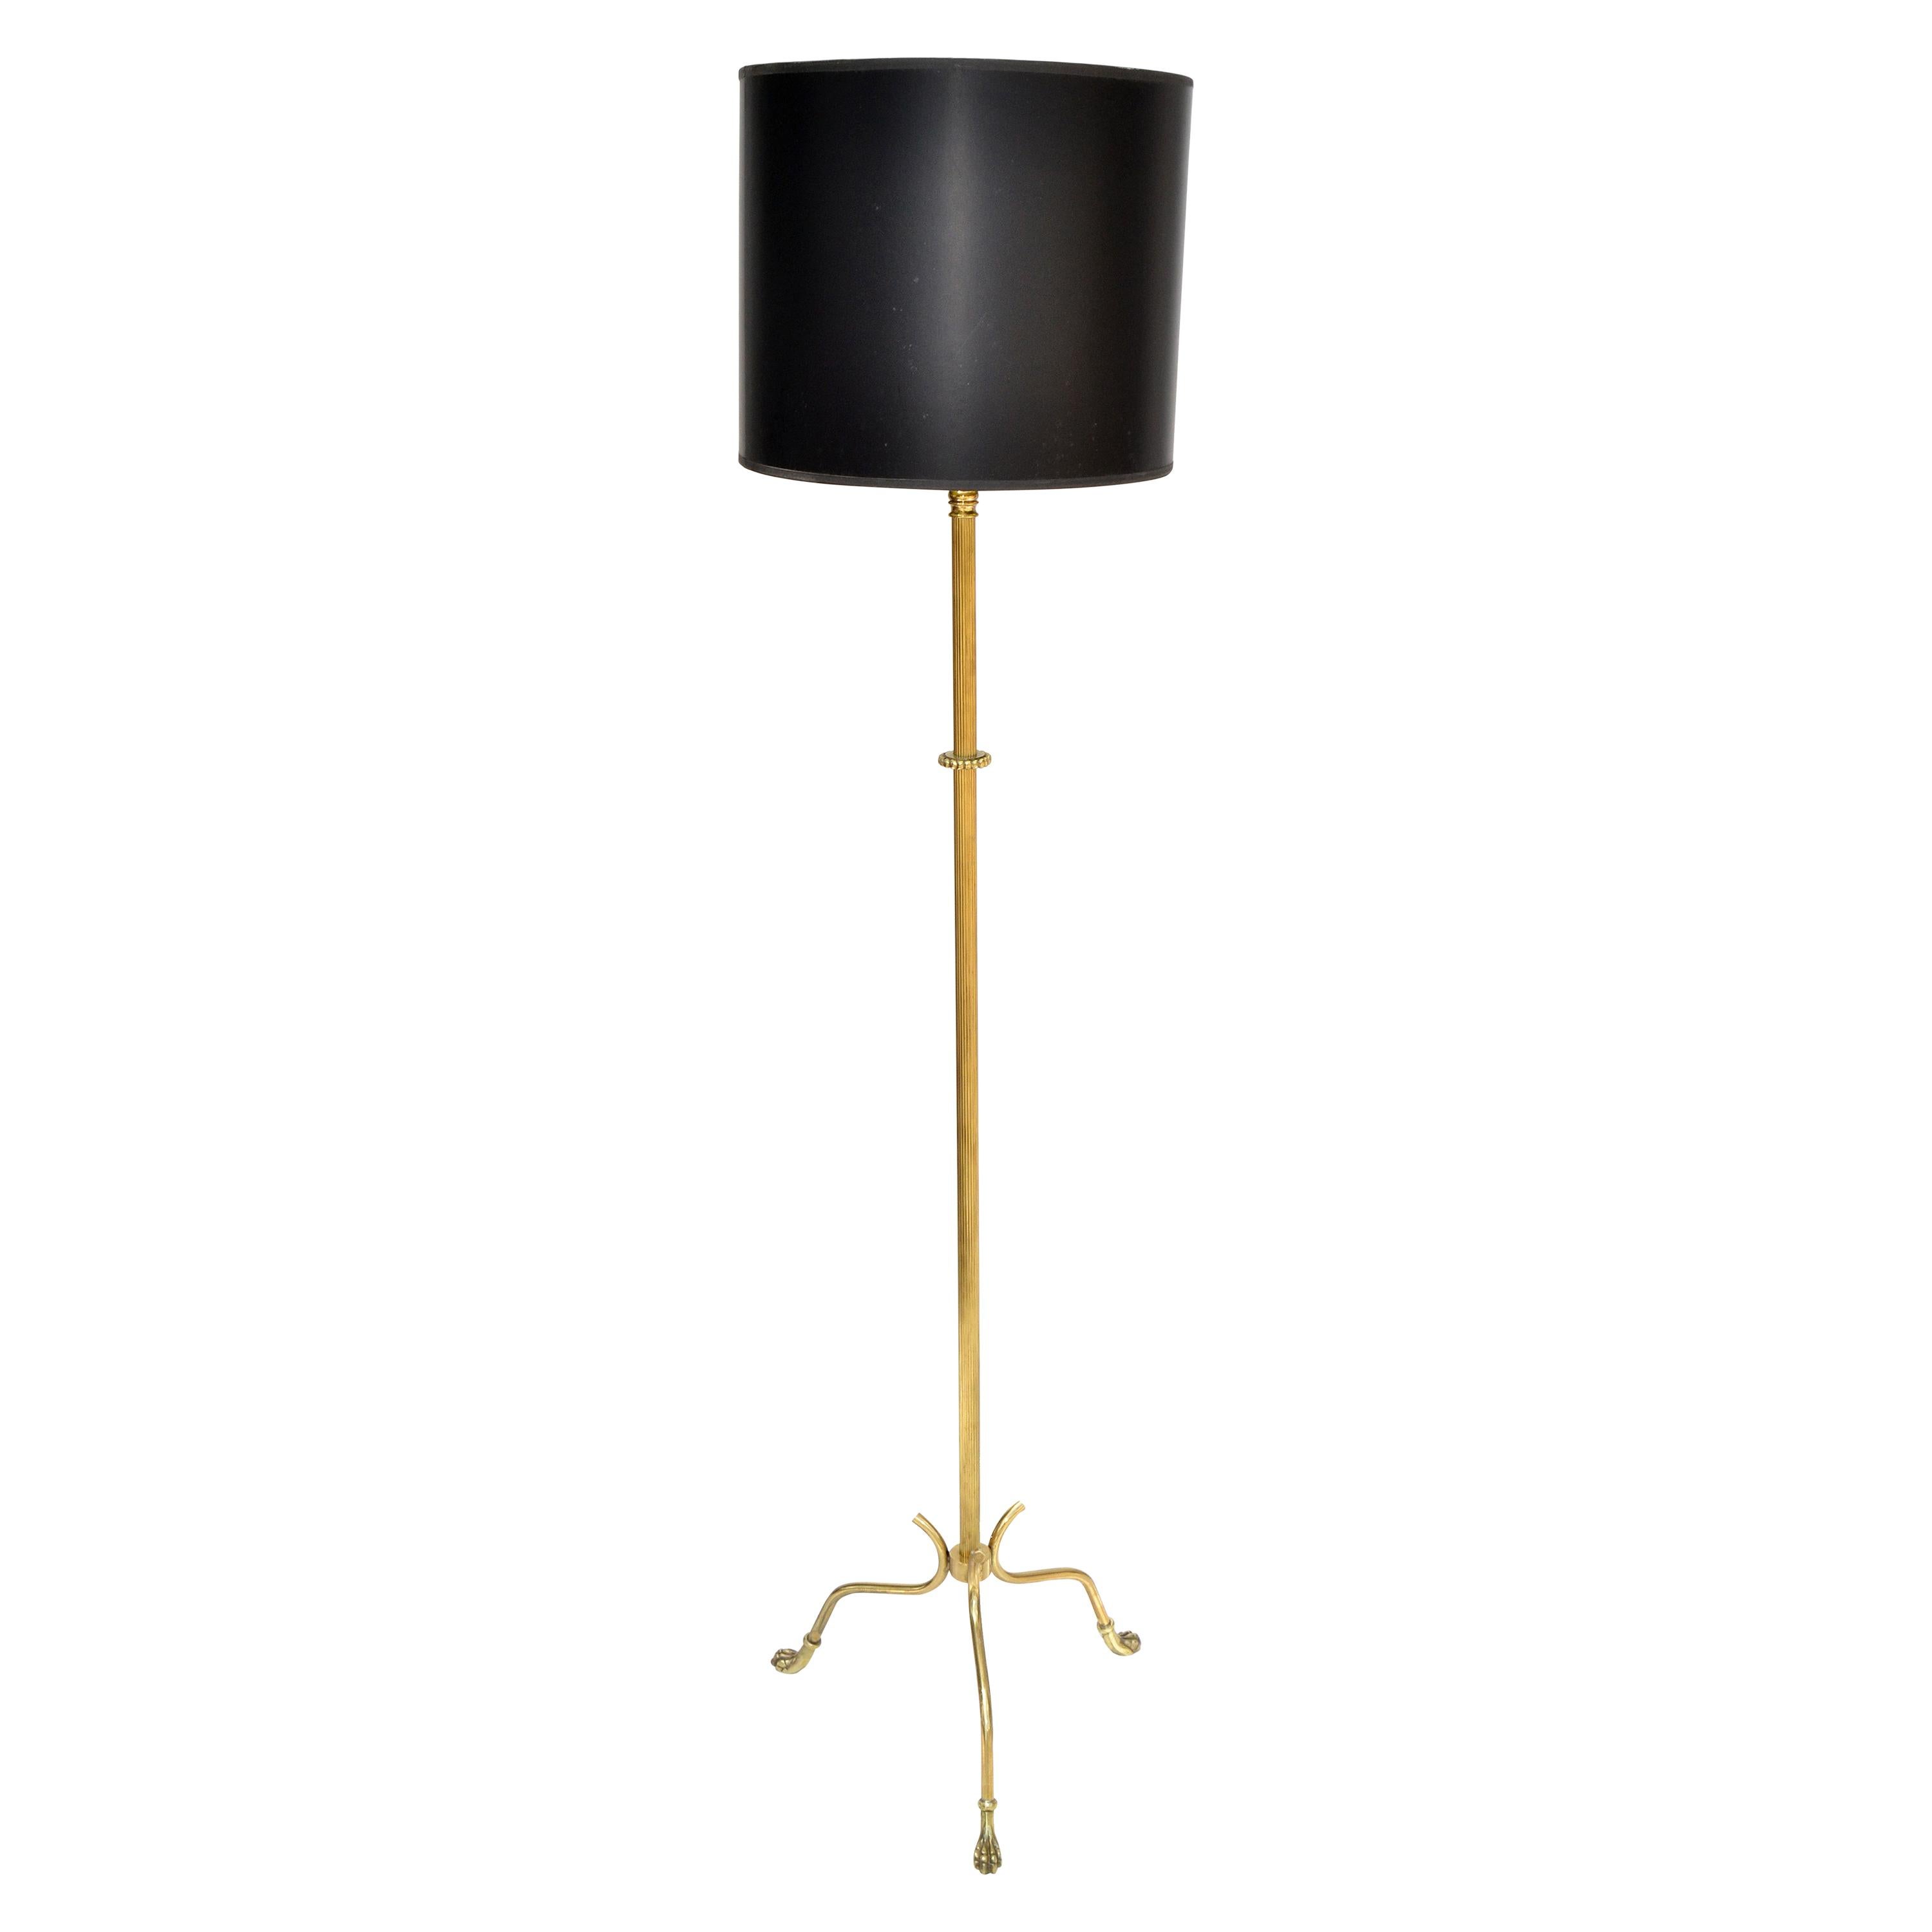 Maison Jansen French Provincial Bronze Claw Feet Floor Lamp For Sale